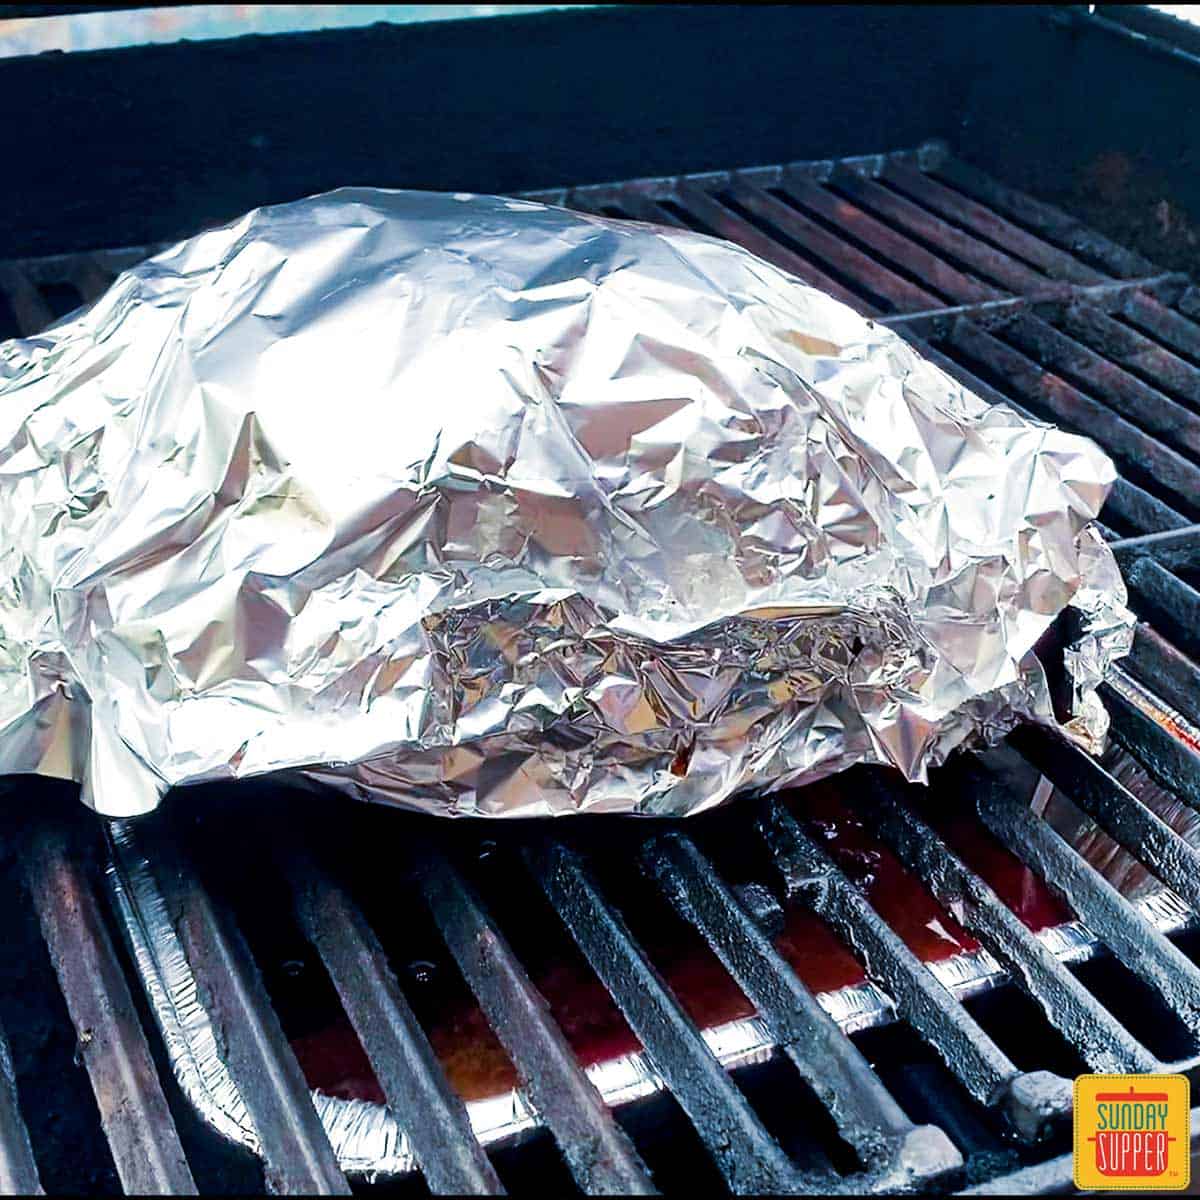 Pork butt wrapped in foil on grill